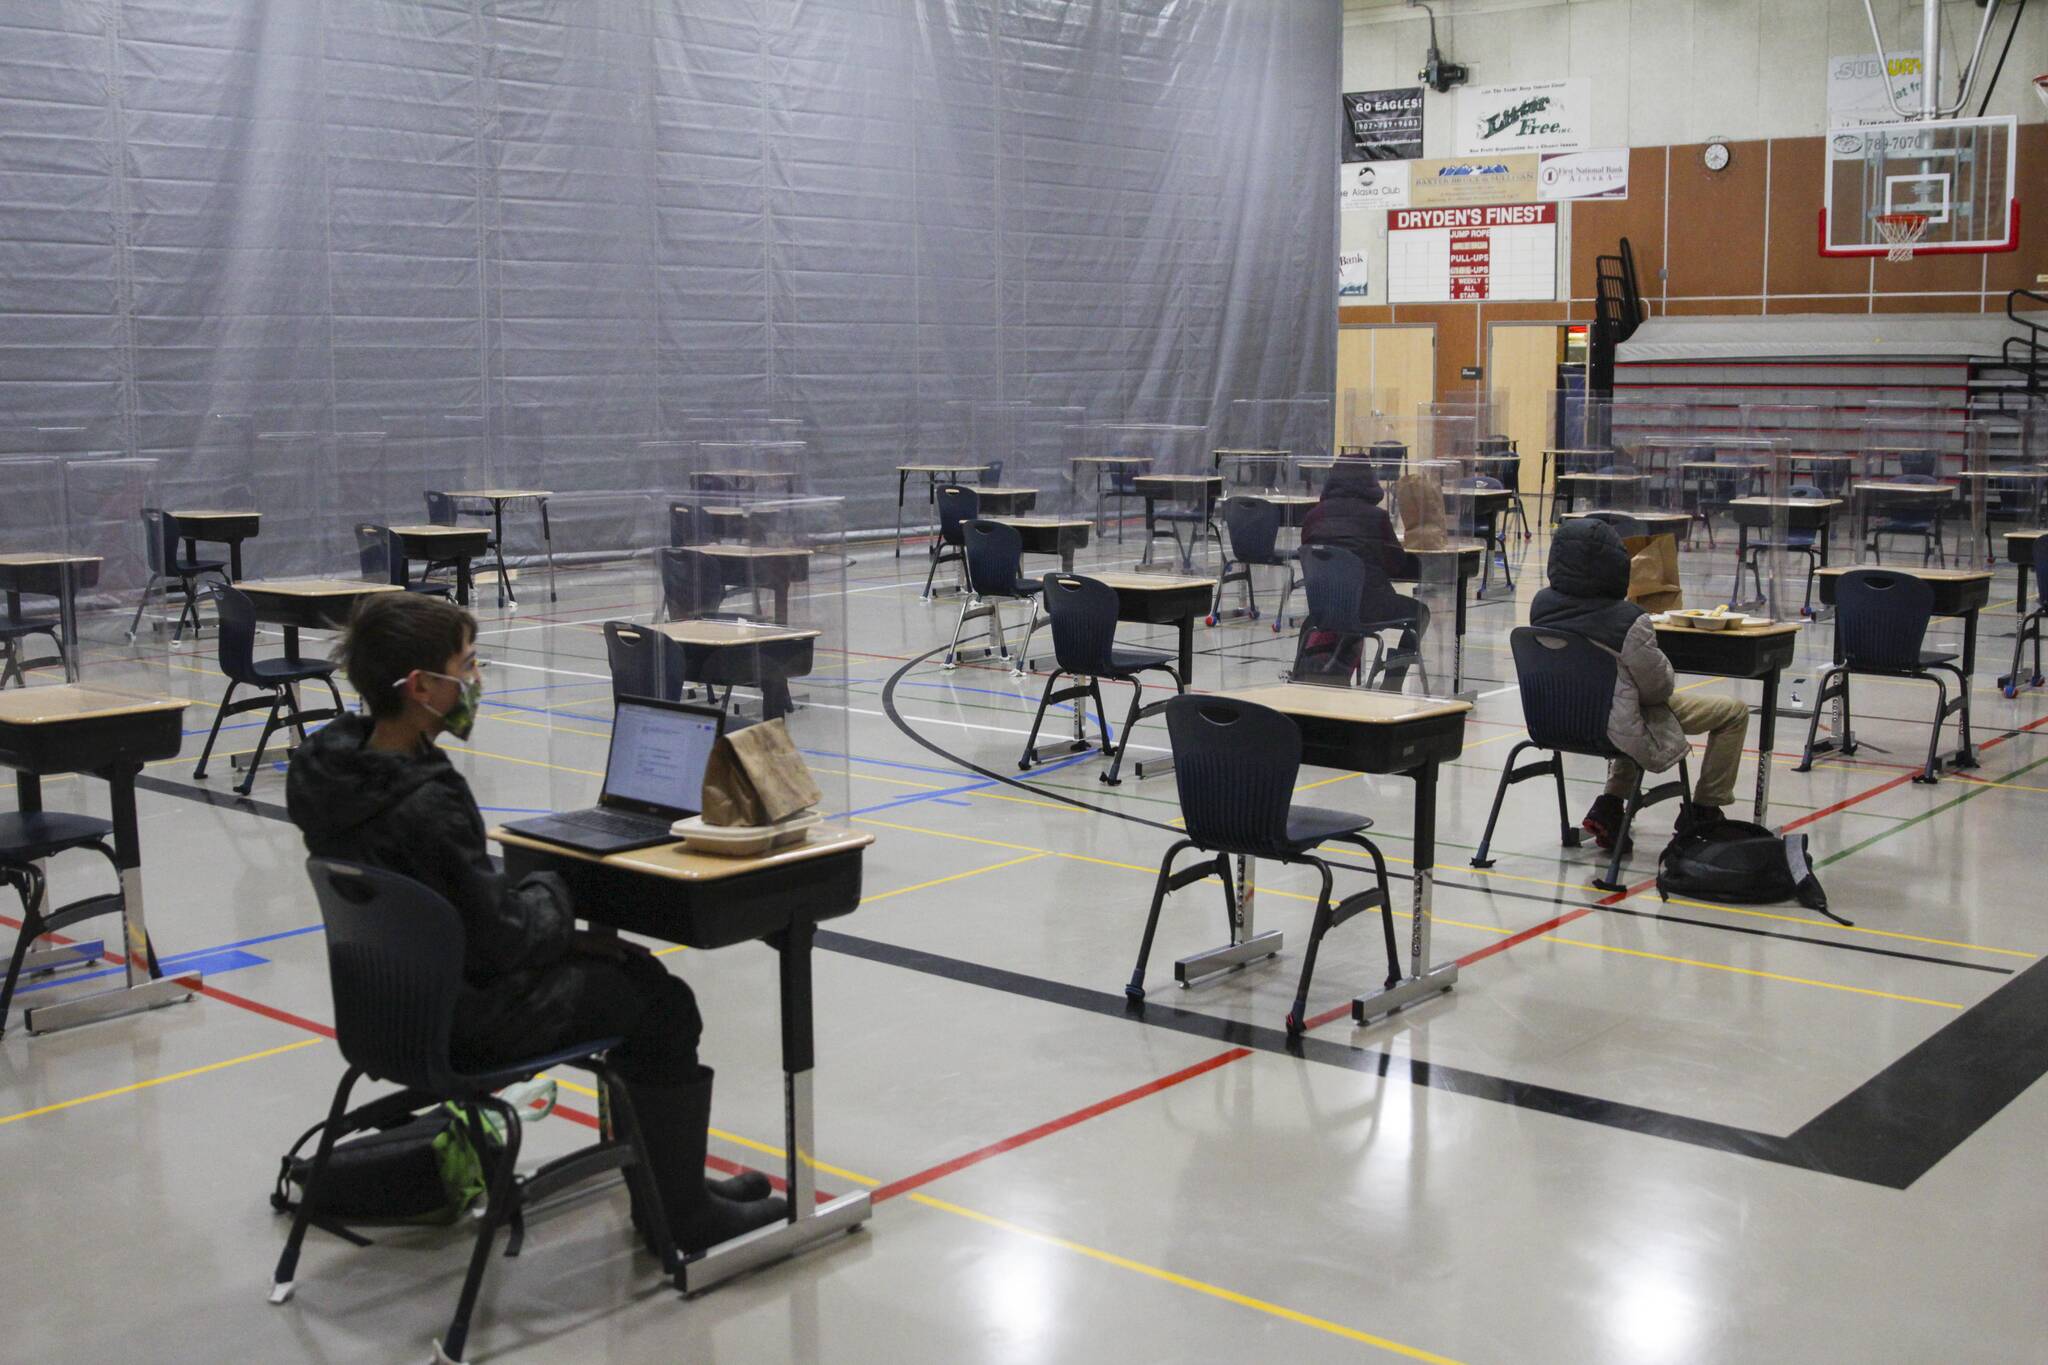 This Empire file photo shows students at Floyd Dryden Middle School, Jan. 11, 2021, with desks separated to accommodate for COVID-19 social distancing protocols. The Juneau School District announced masks would become optional indoors on April 4, 2022. (Michael S. Lockett / Juneau Empire file)